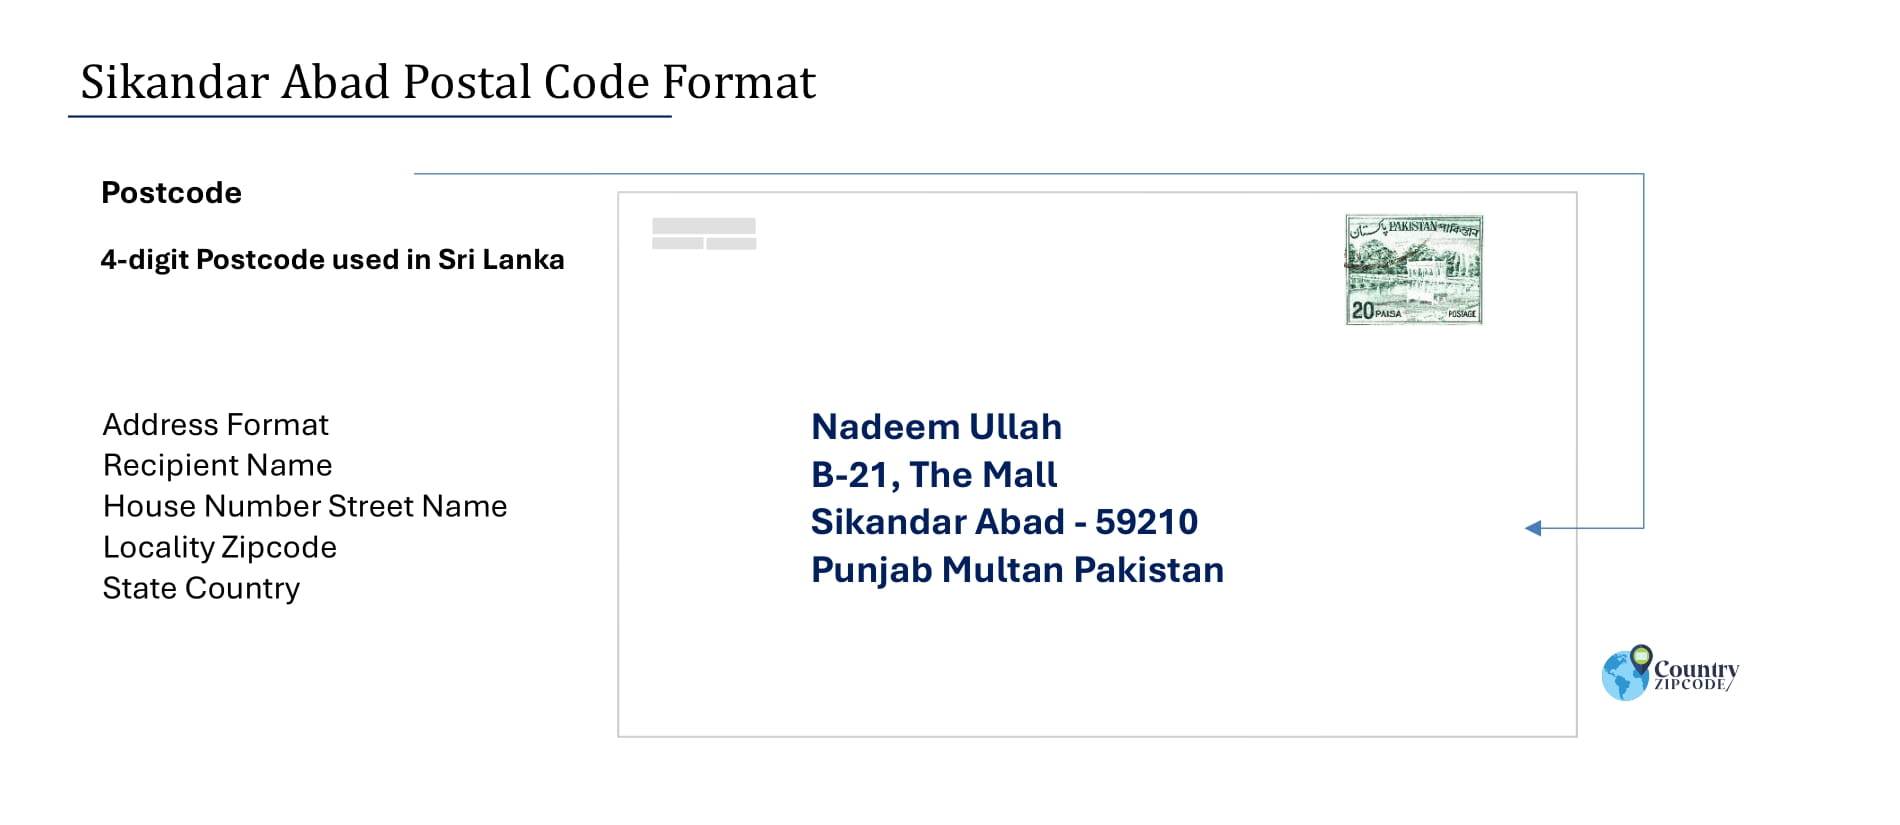 Example of Sikandar Abad Pakistan Postal code and Address format